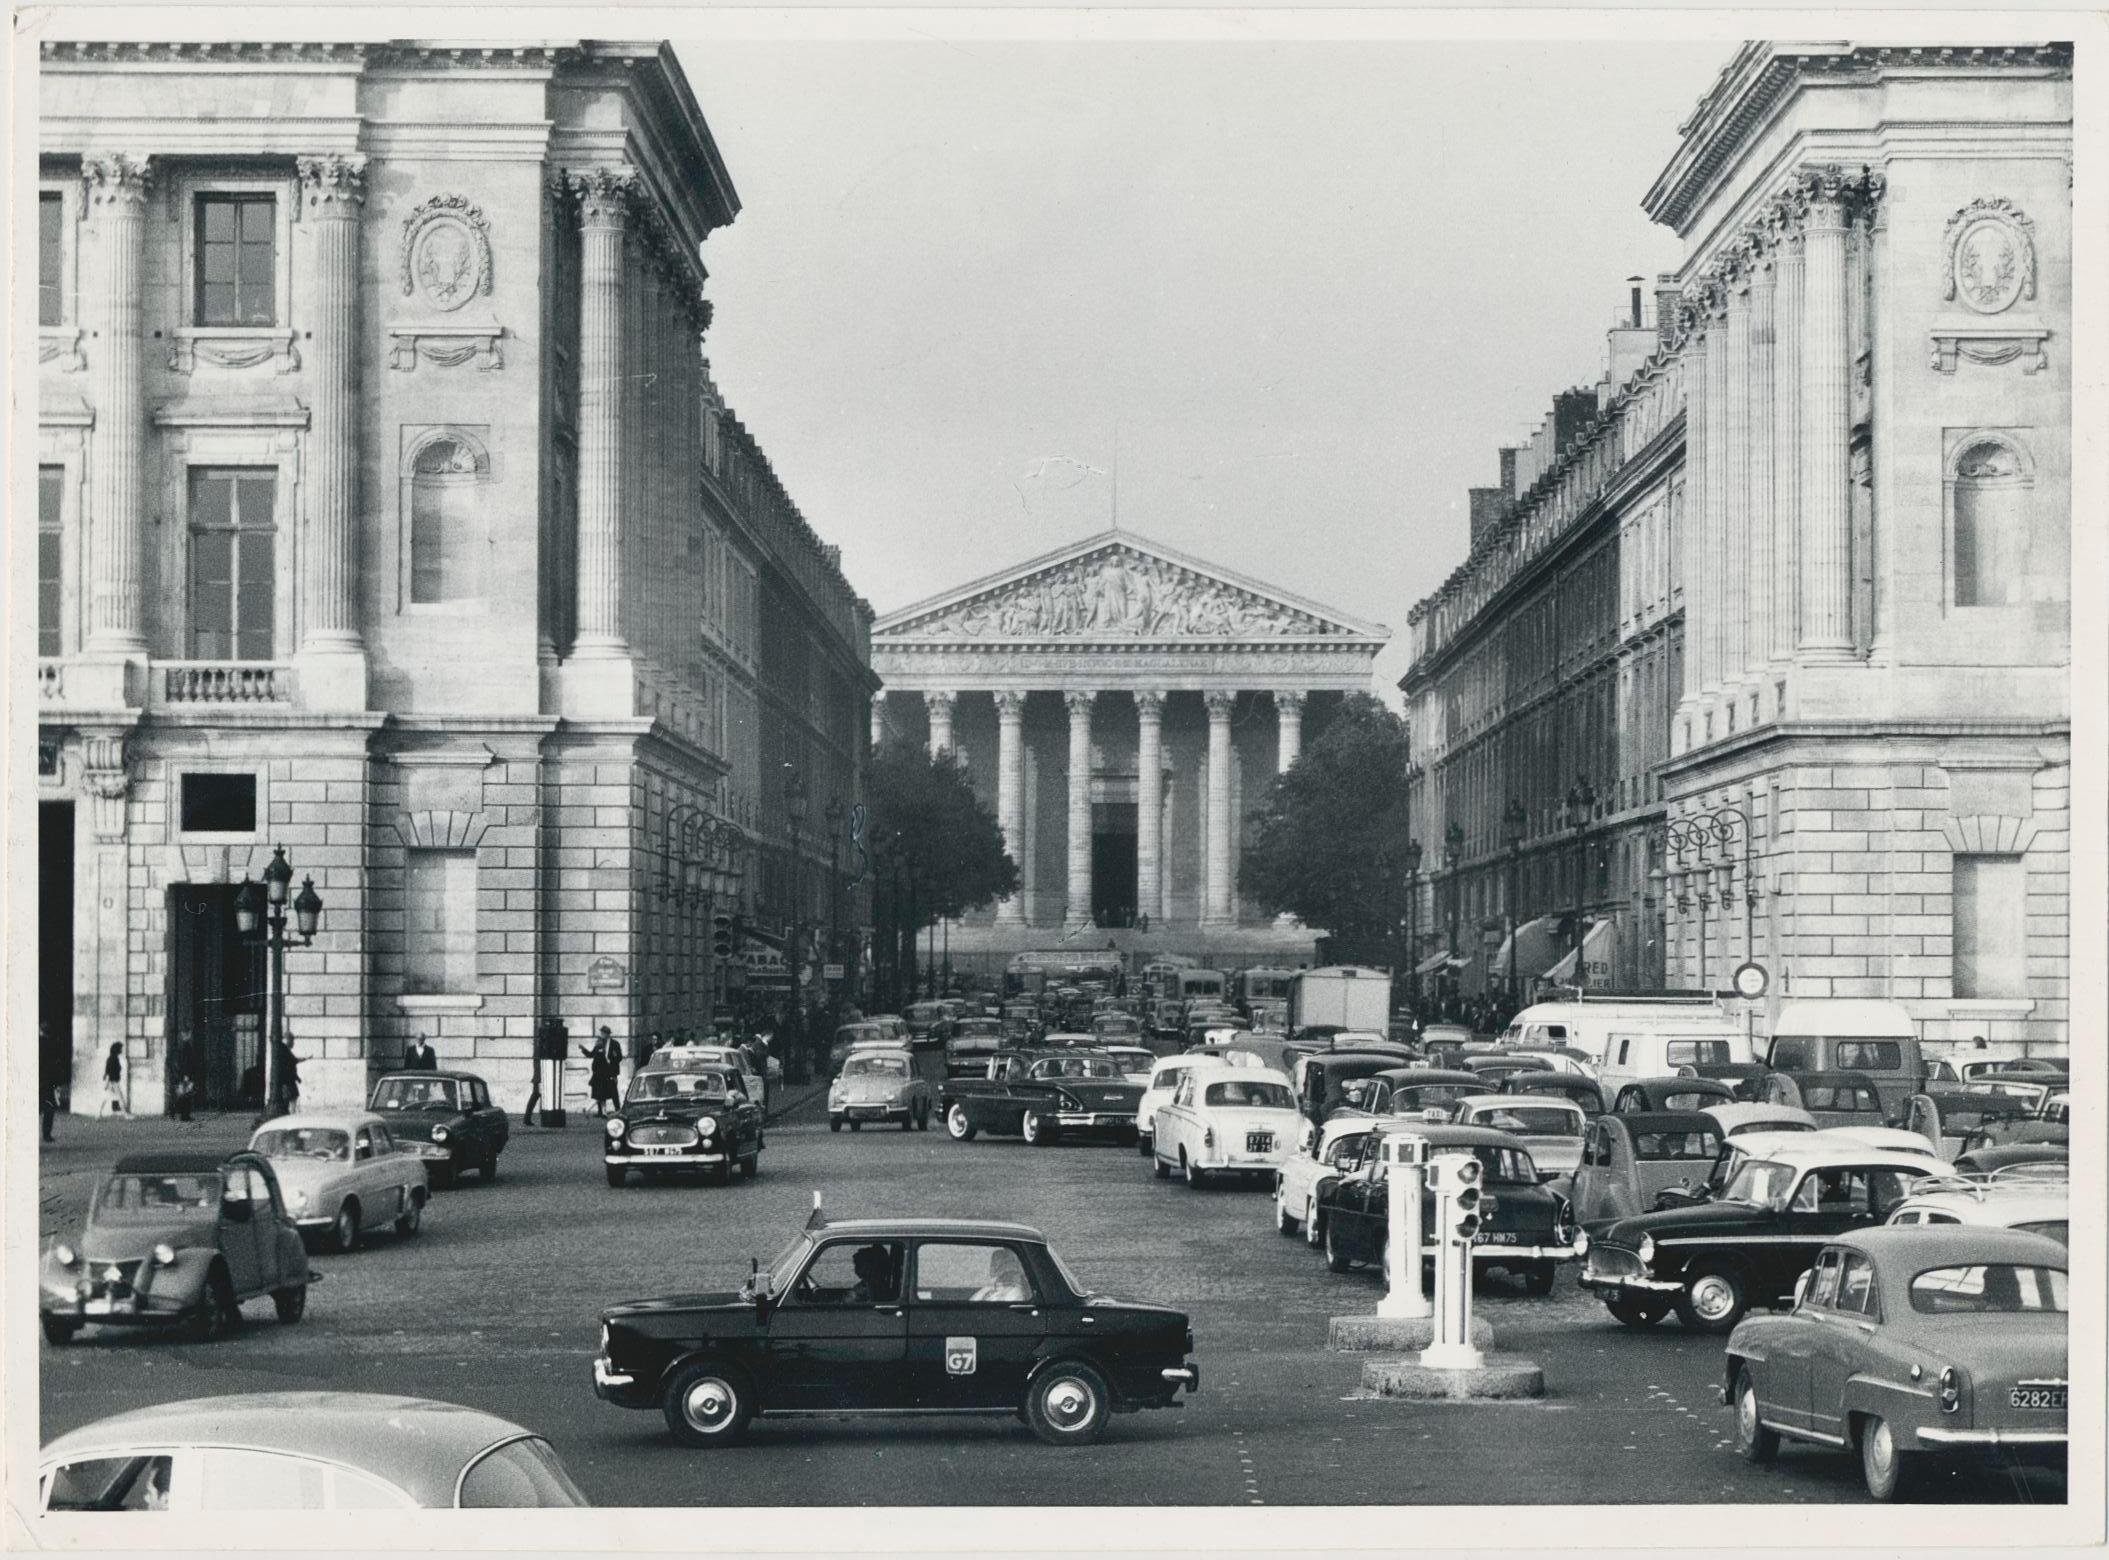 Erich Andres Black and White Photograph - Cars, Road, Street Photography, Black and White, Paris, 1950s, 13 x 17, 6 cm